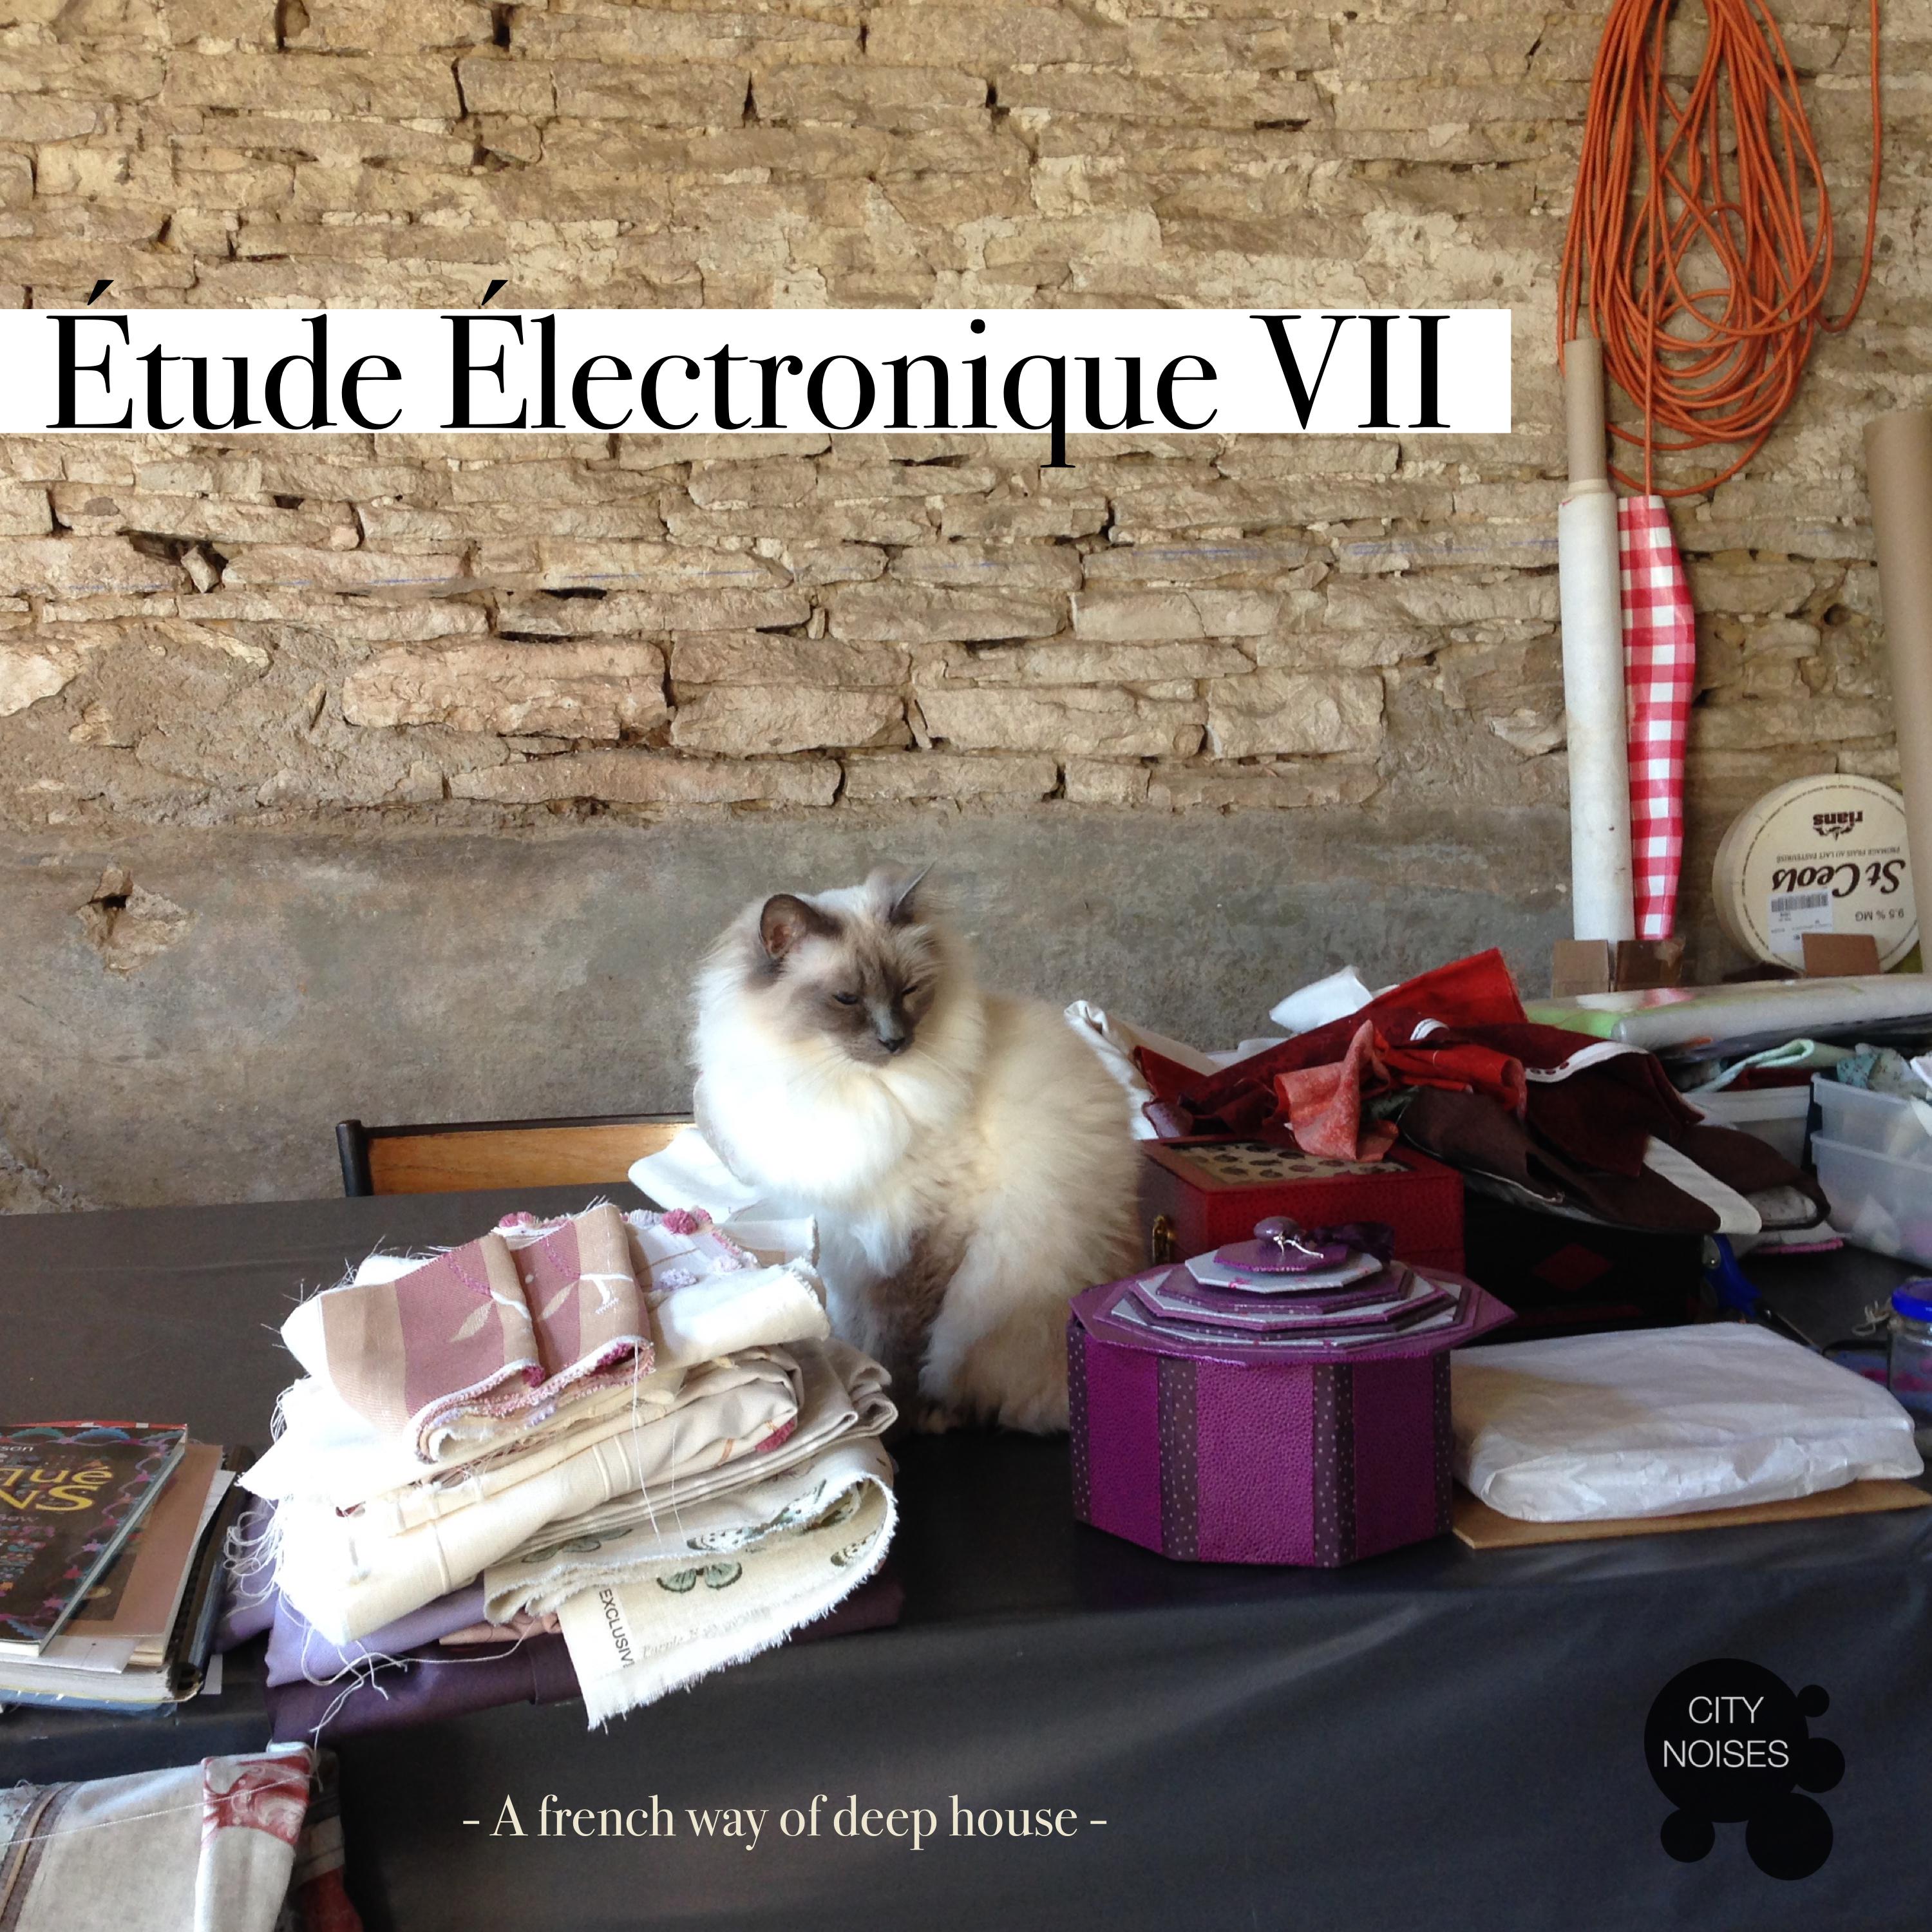 Etude Electronique VII - A French Way of Deep House